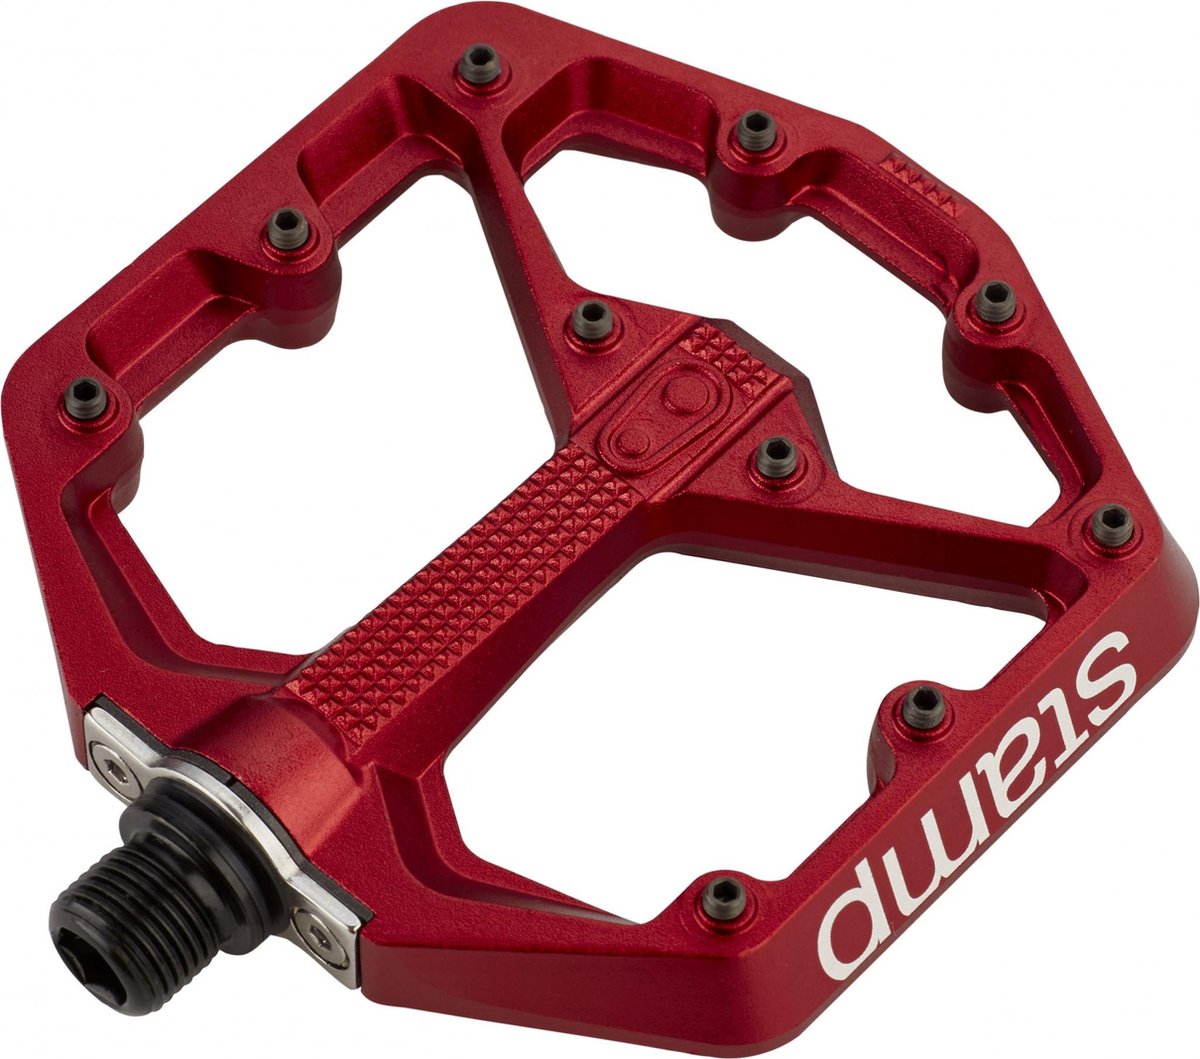 Crankbrothers Stamp 7 Small Pedalen, rood